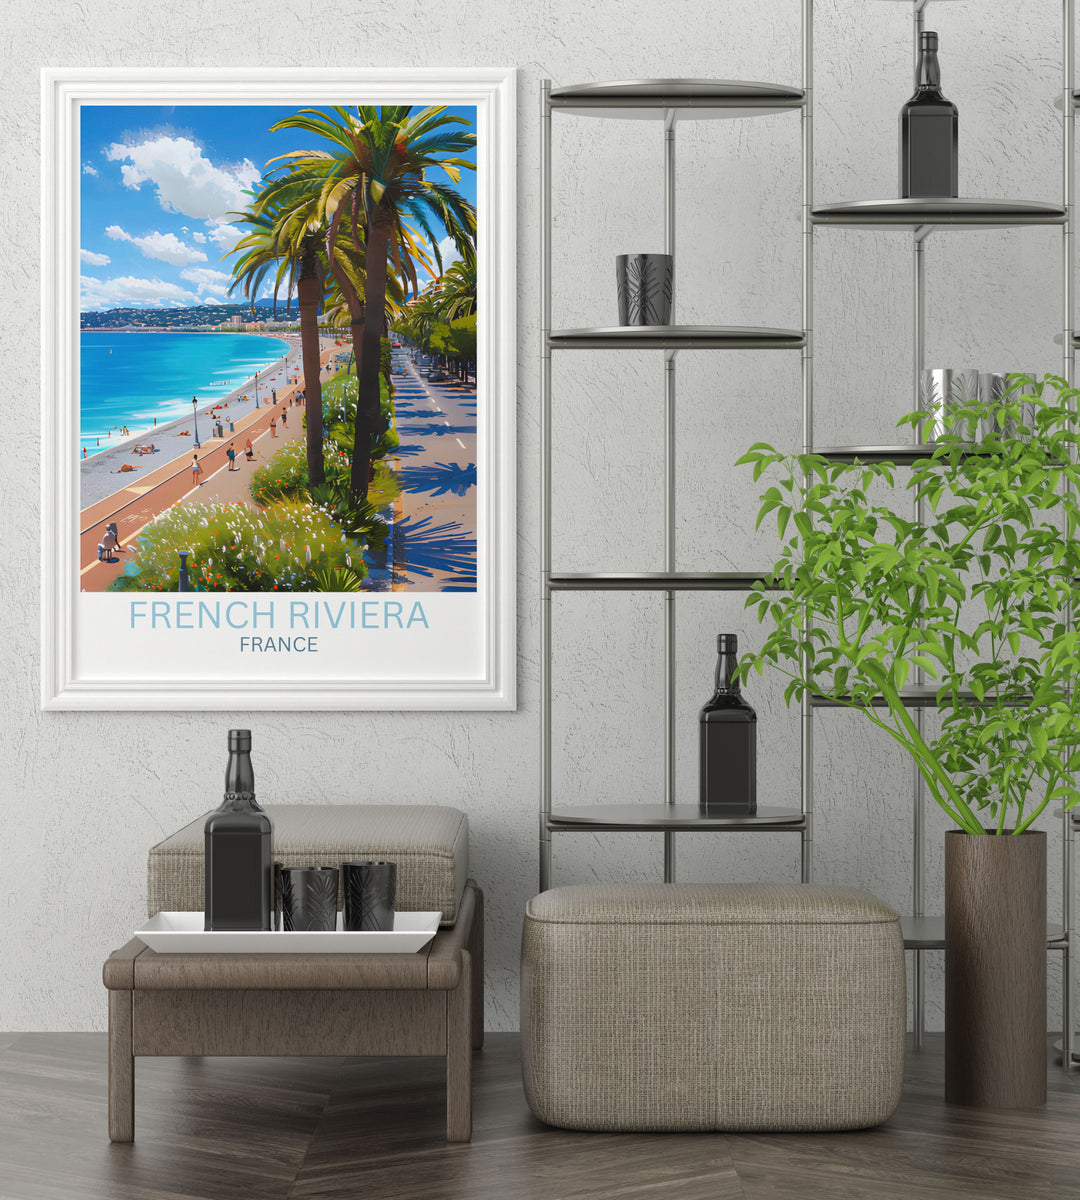 Canvas art of Riviera beaches showing serene sea views, sandy shores, and relaxing holiday vibes perfect for any room